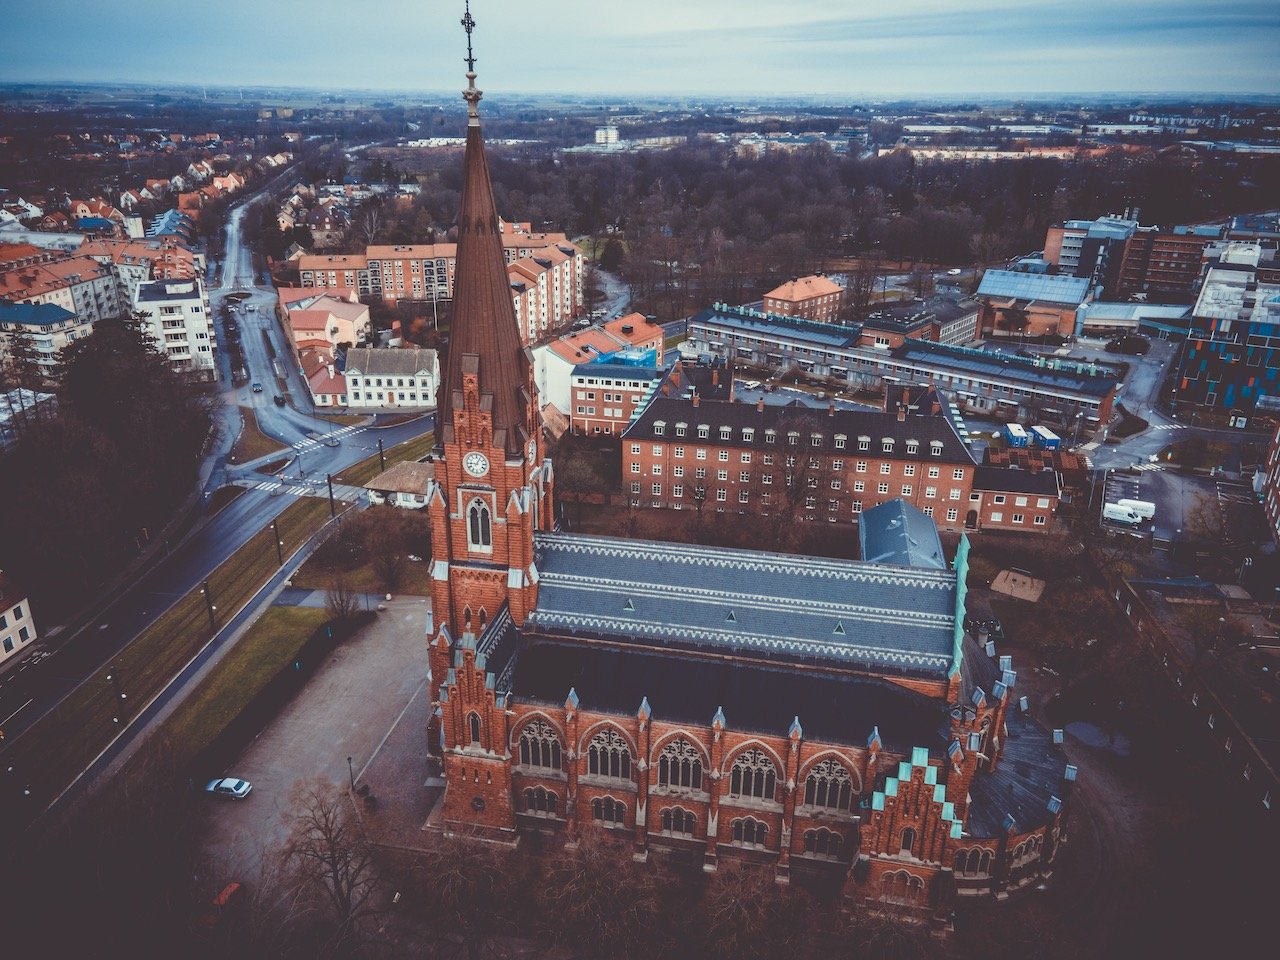   All Saints Church, Lund, Sweden (ISO 100, 4.5 mm,  f /2.8, 1/90 s)  